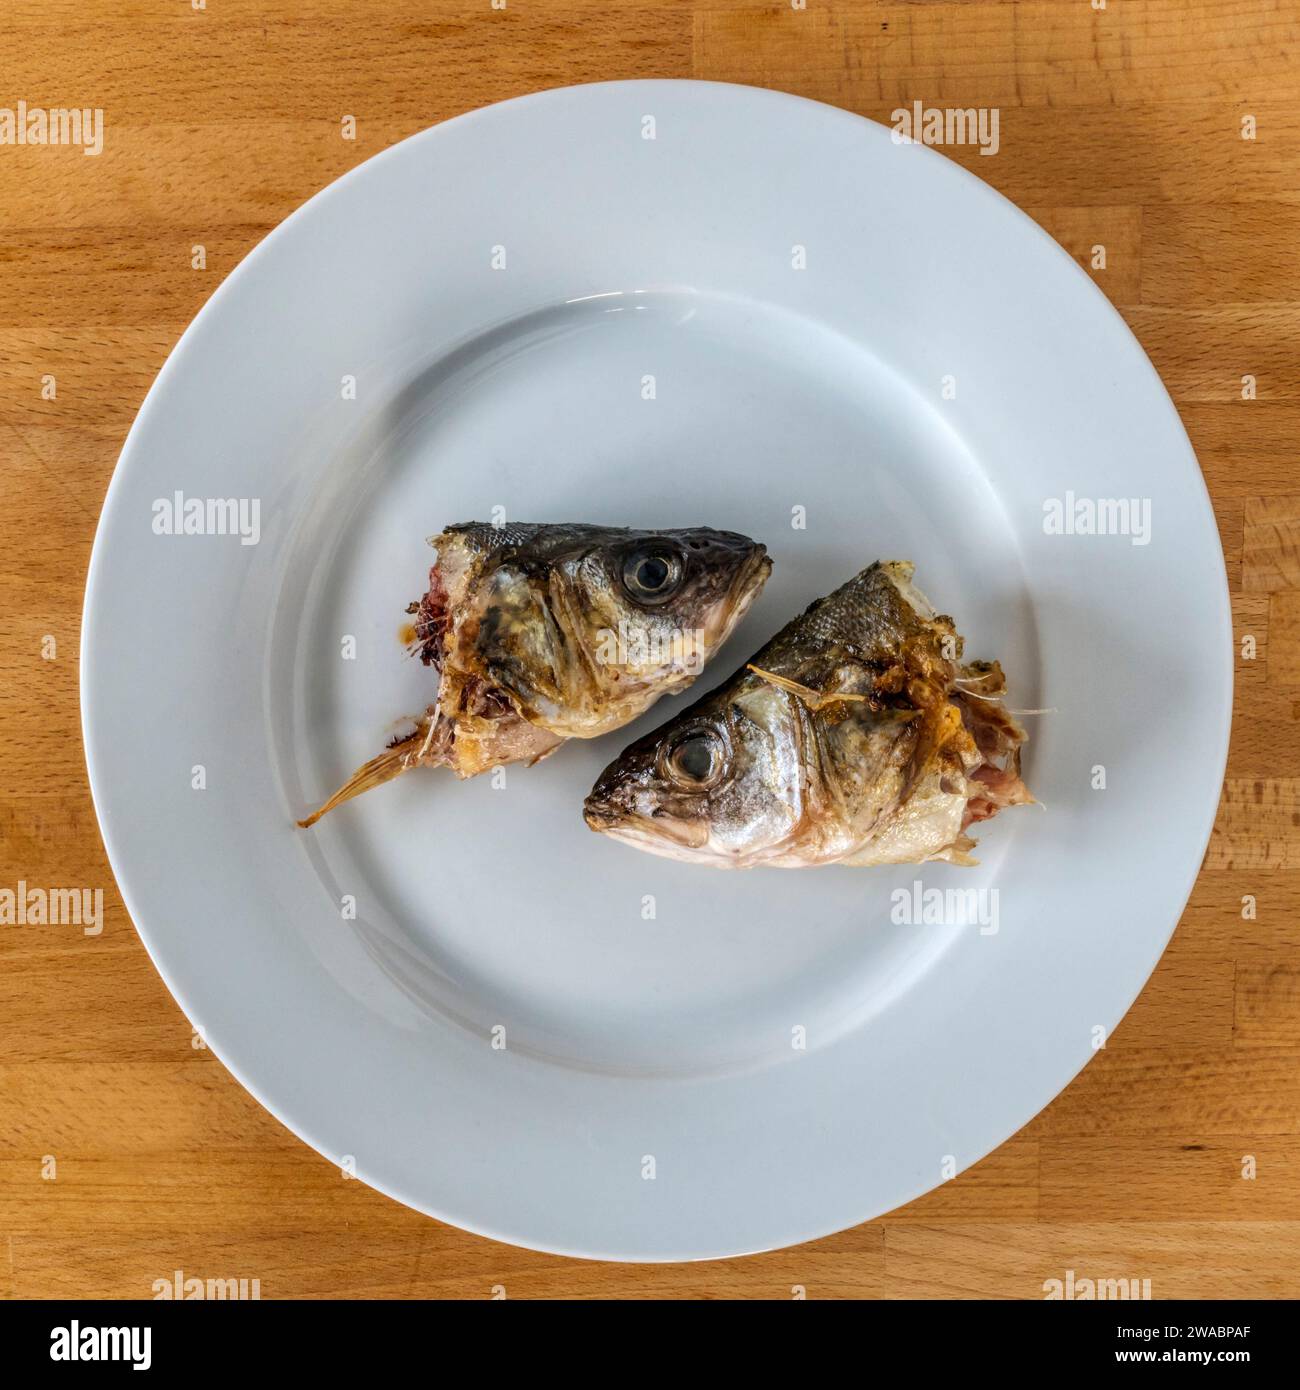 Two sea bass heads on a round white plate. Stock Photo